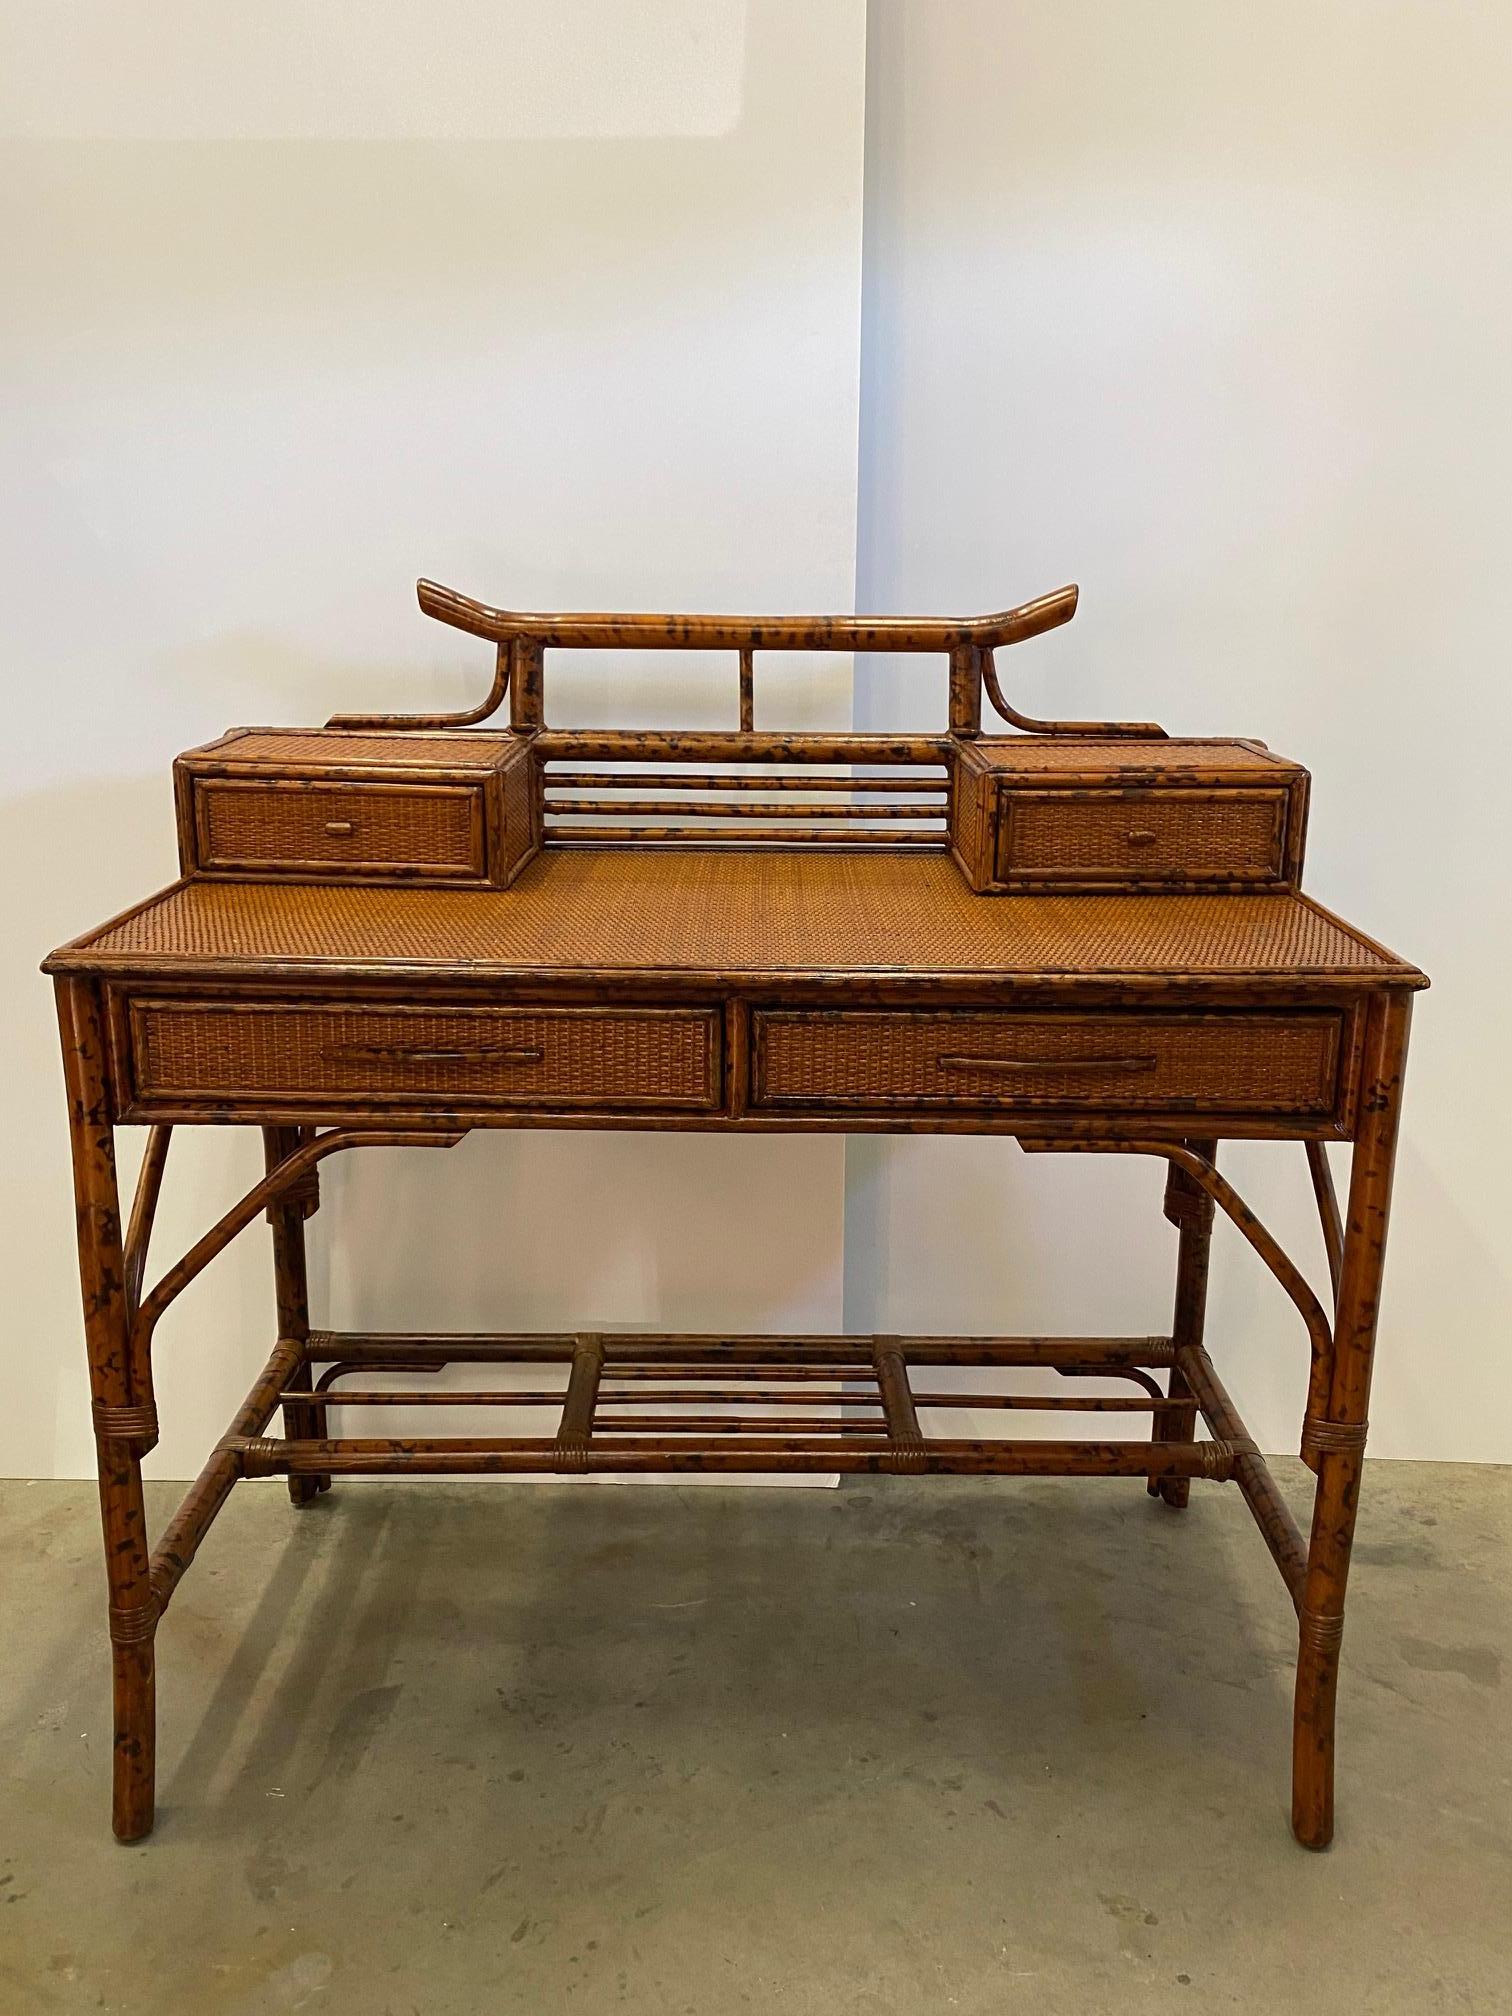 Stunning writing desk and matching chair in the British Colonial style having a smart combo of grass cloth wrapping and faux bamboo.
Chair measures 38.5 H 19.5 W 17 D seat height 17
Desk opening 25.